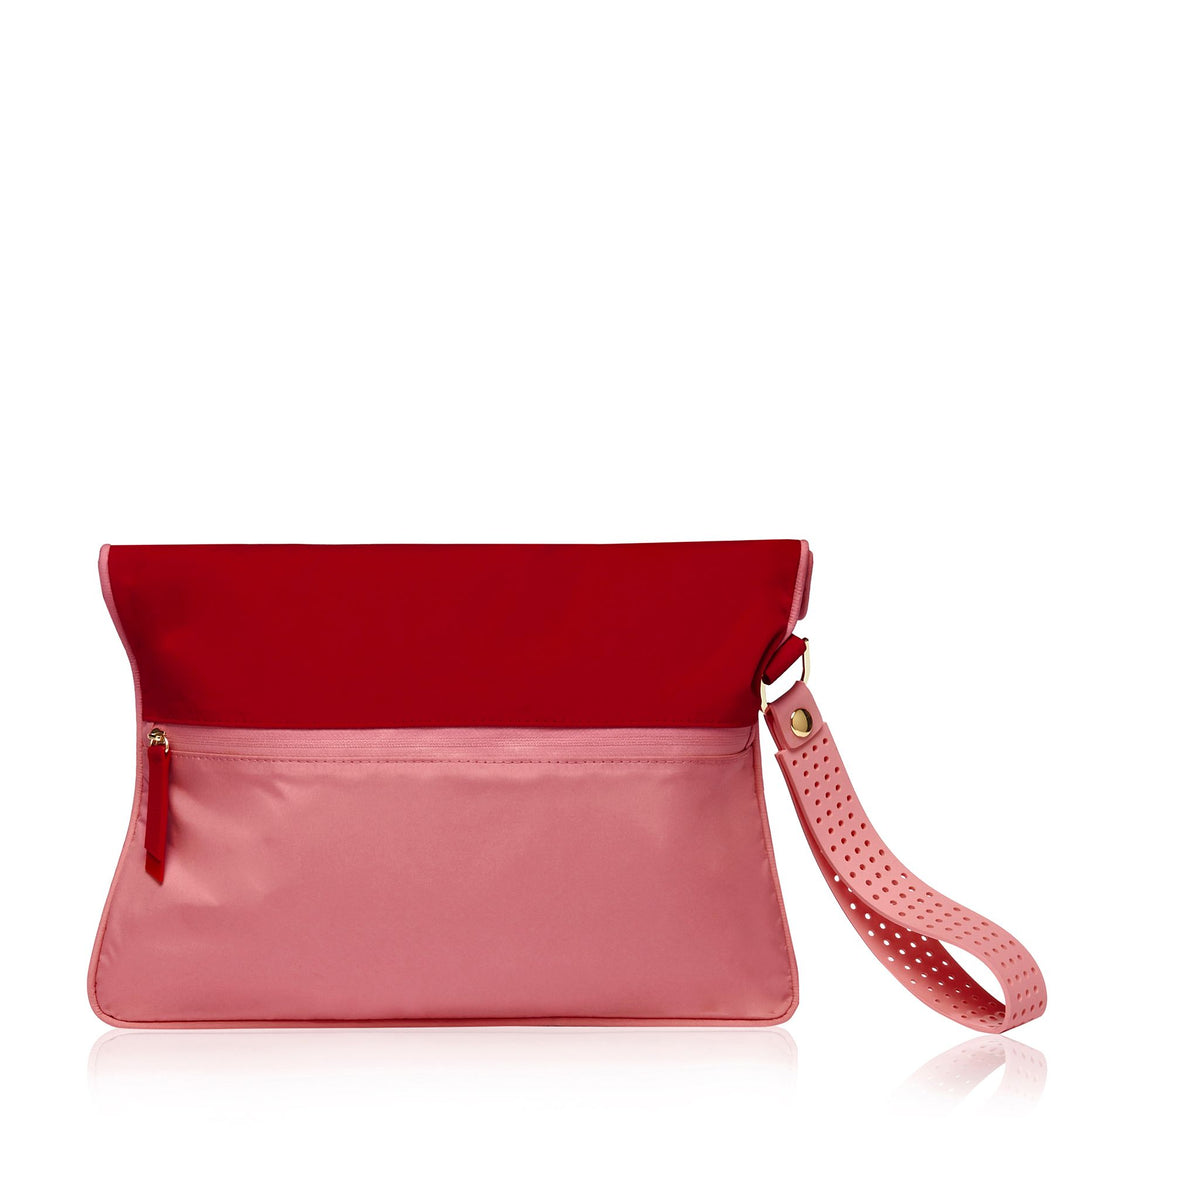 Rear view of Large Wet Bag in Chilli and Peony colourway showing back zip